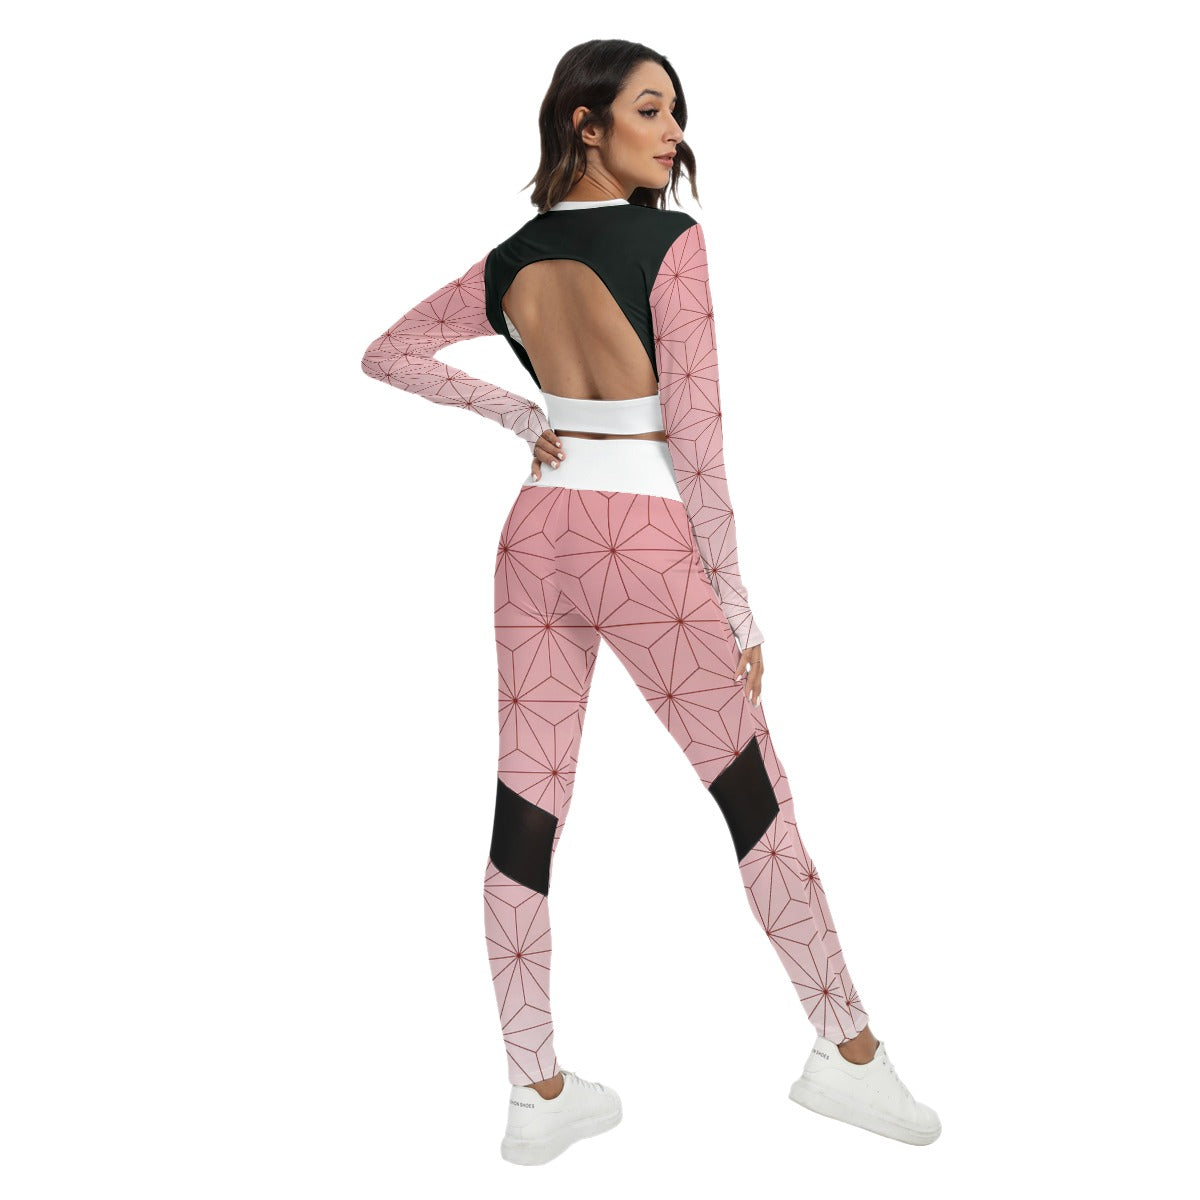 "OUT OF THE BOX" Legging Set